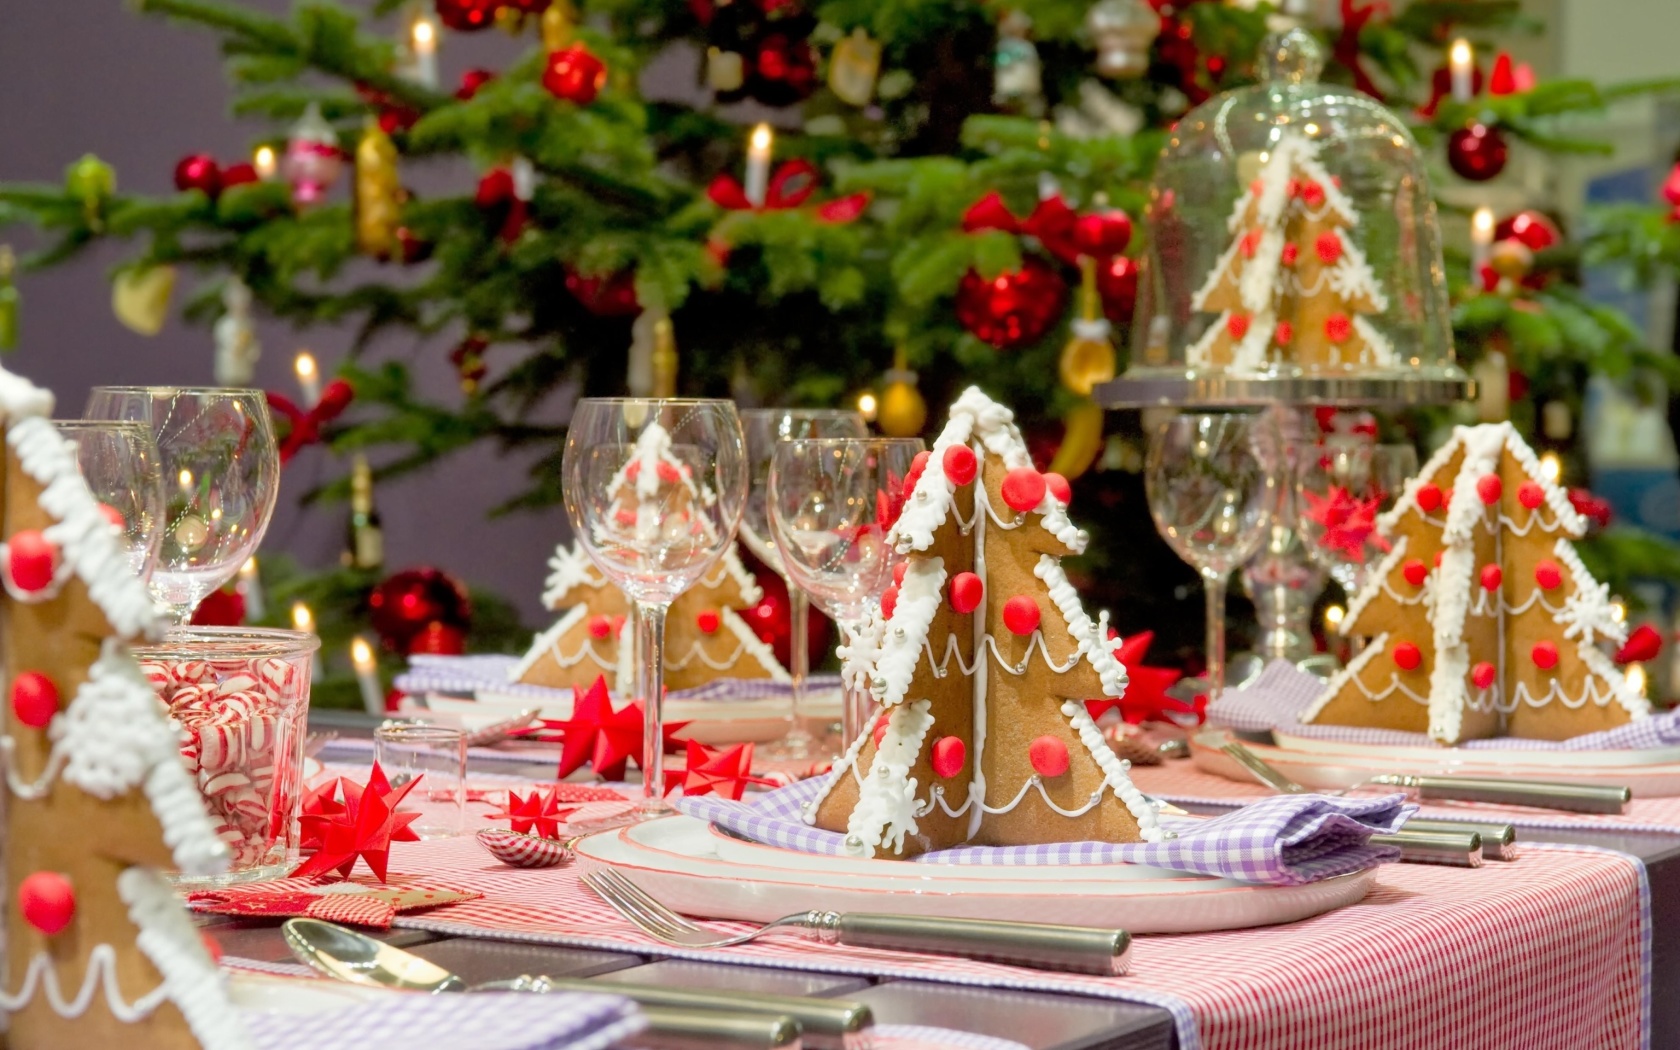 Christmas Table Decorations Ideas wallpaper 1680x1050